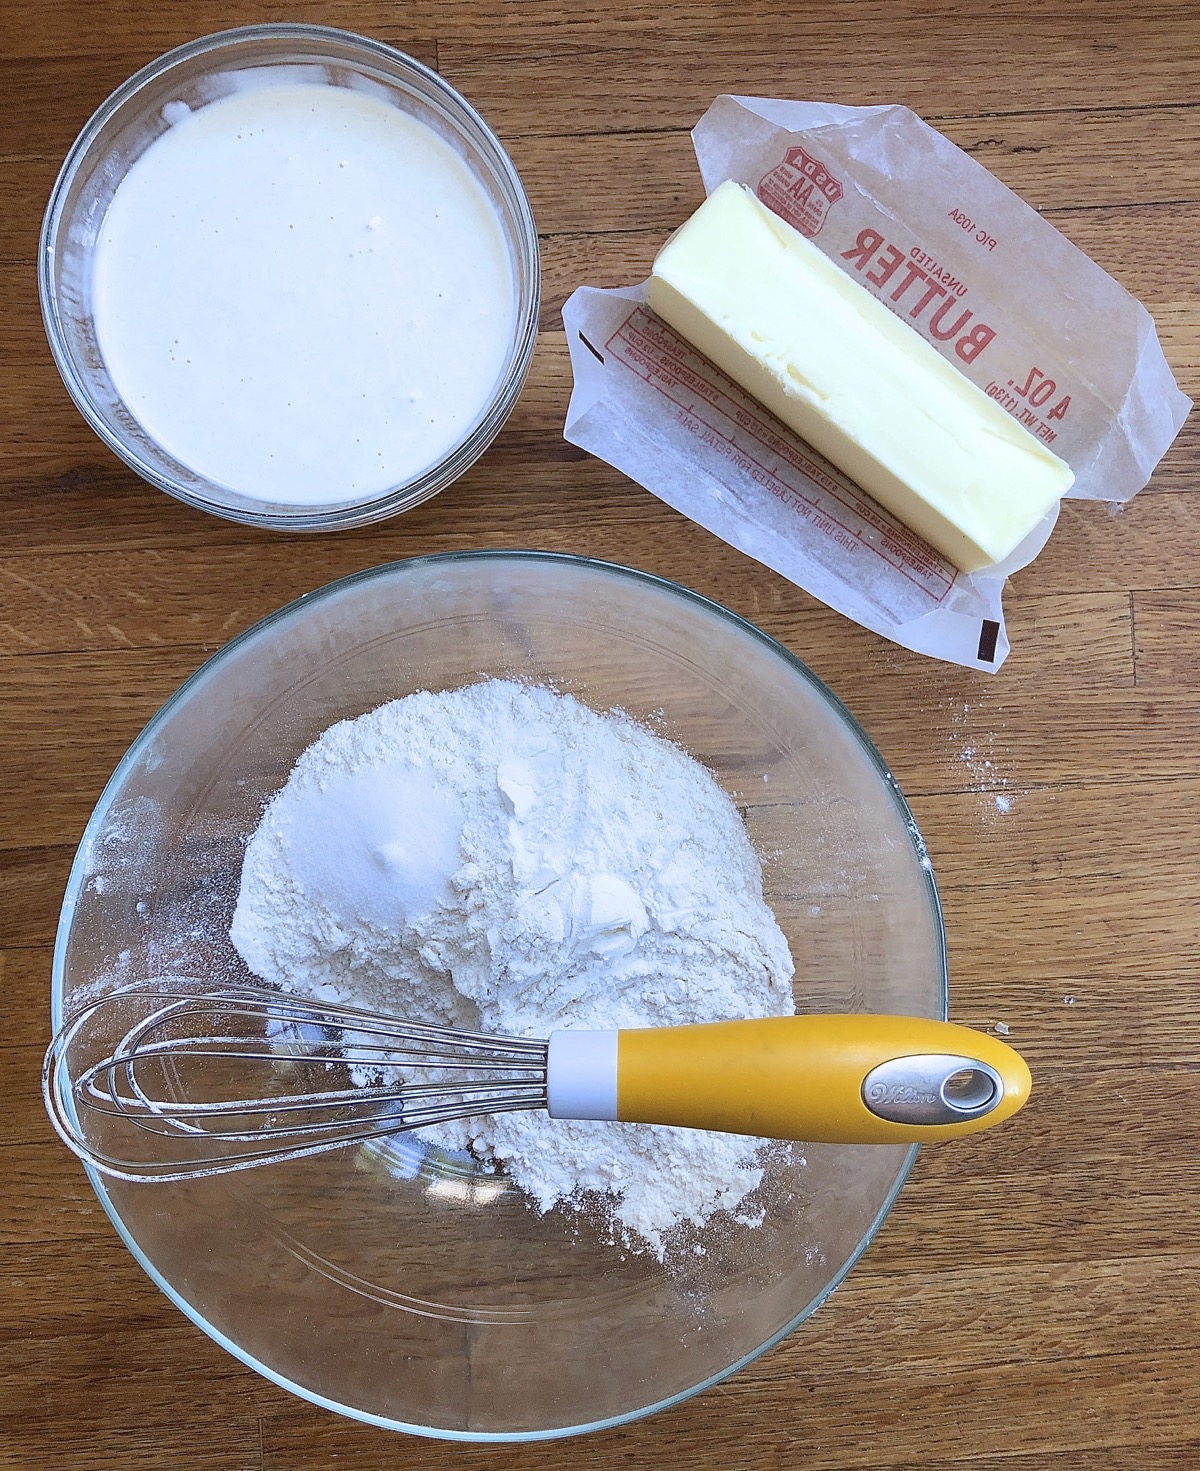 All the components for sourdough biscuits: dry ingredients in a bowl, butter, and starter.